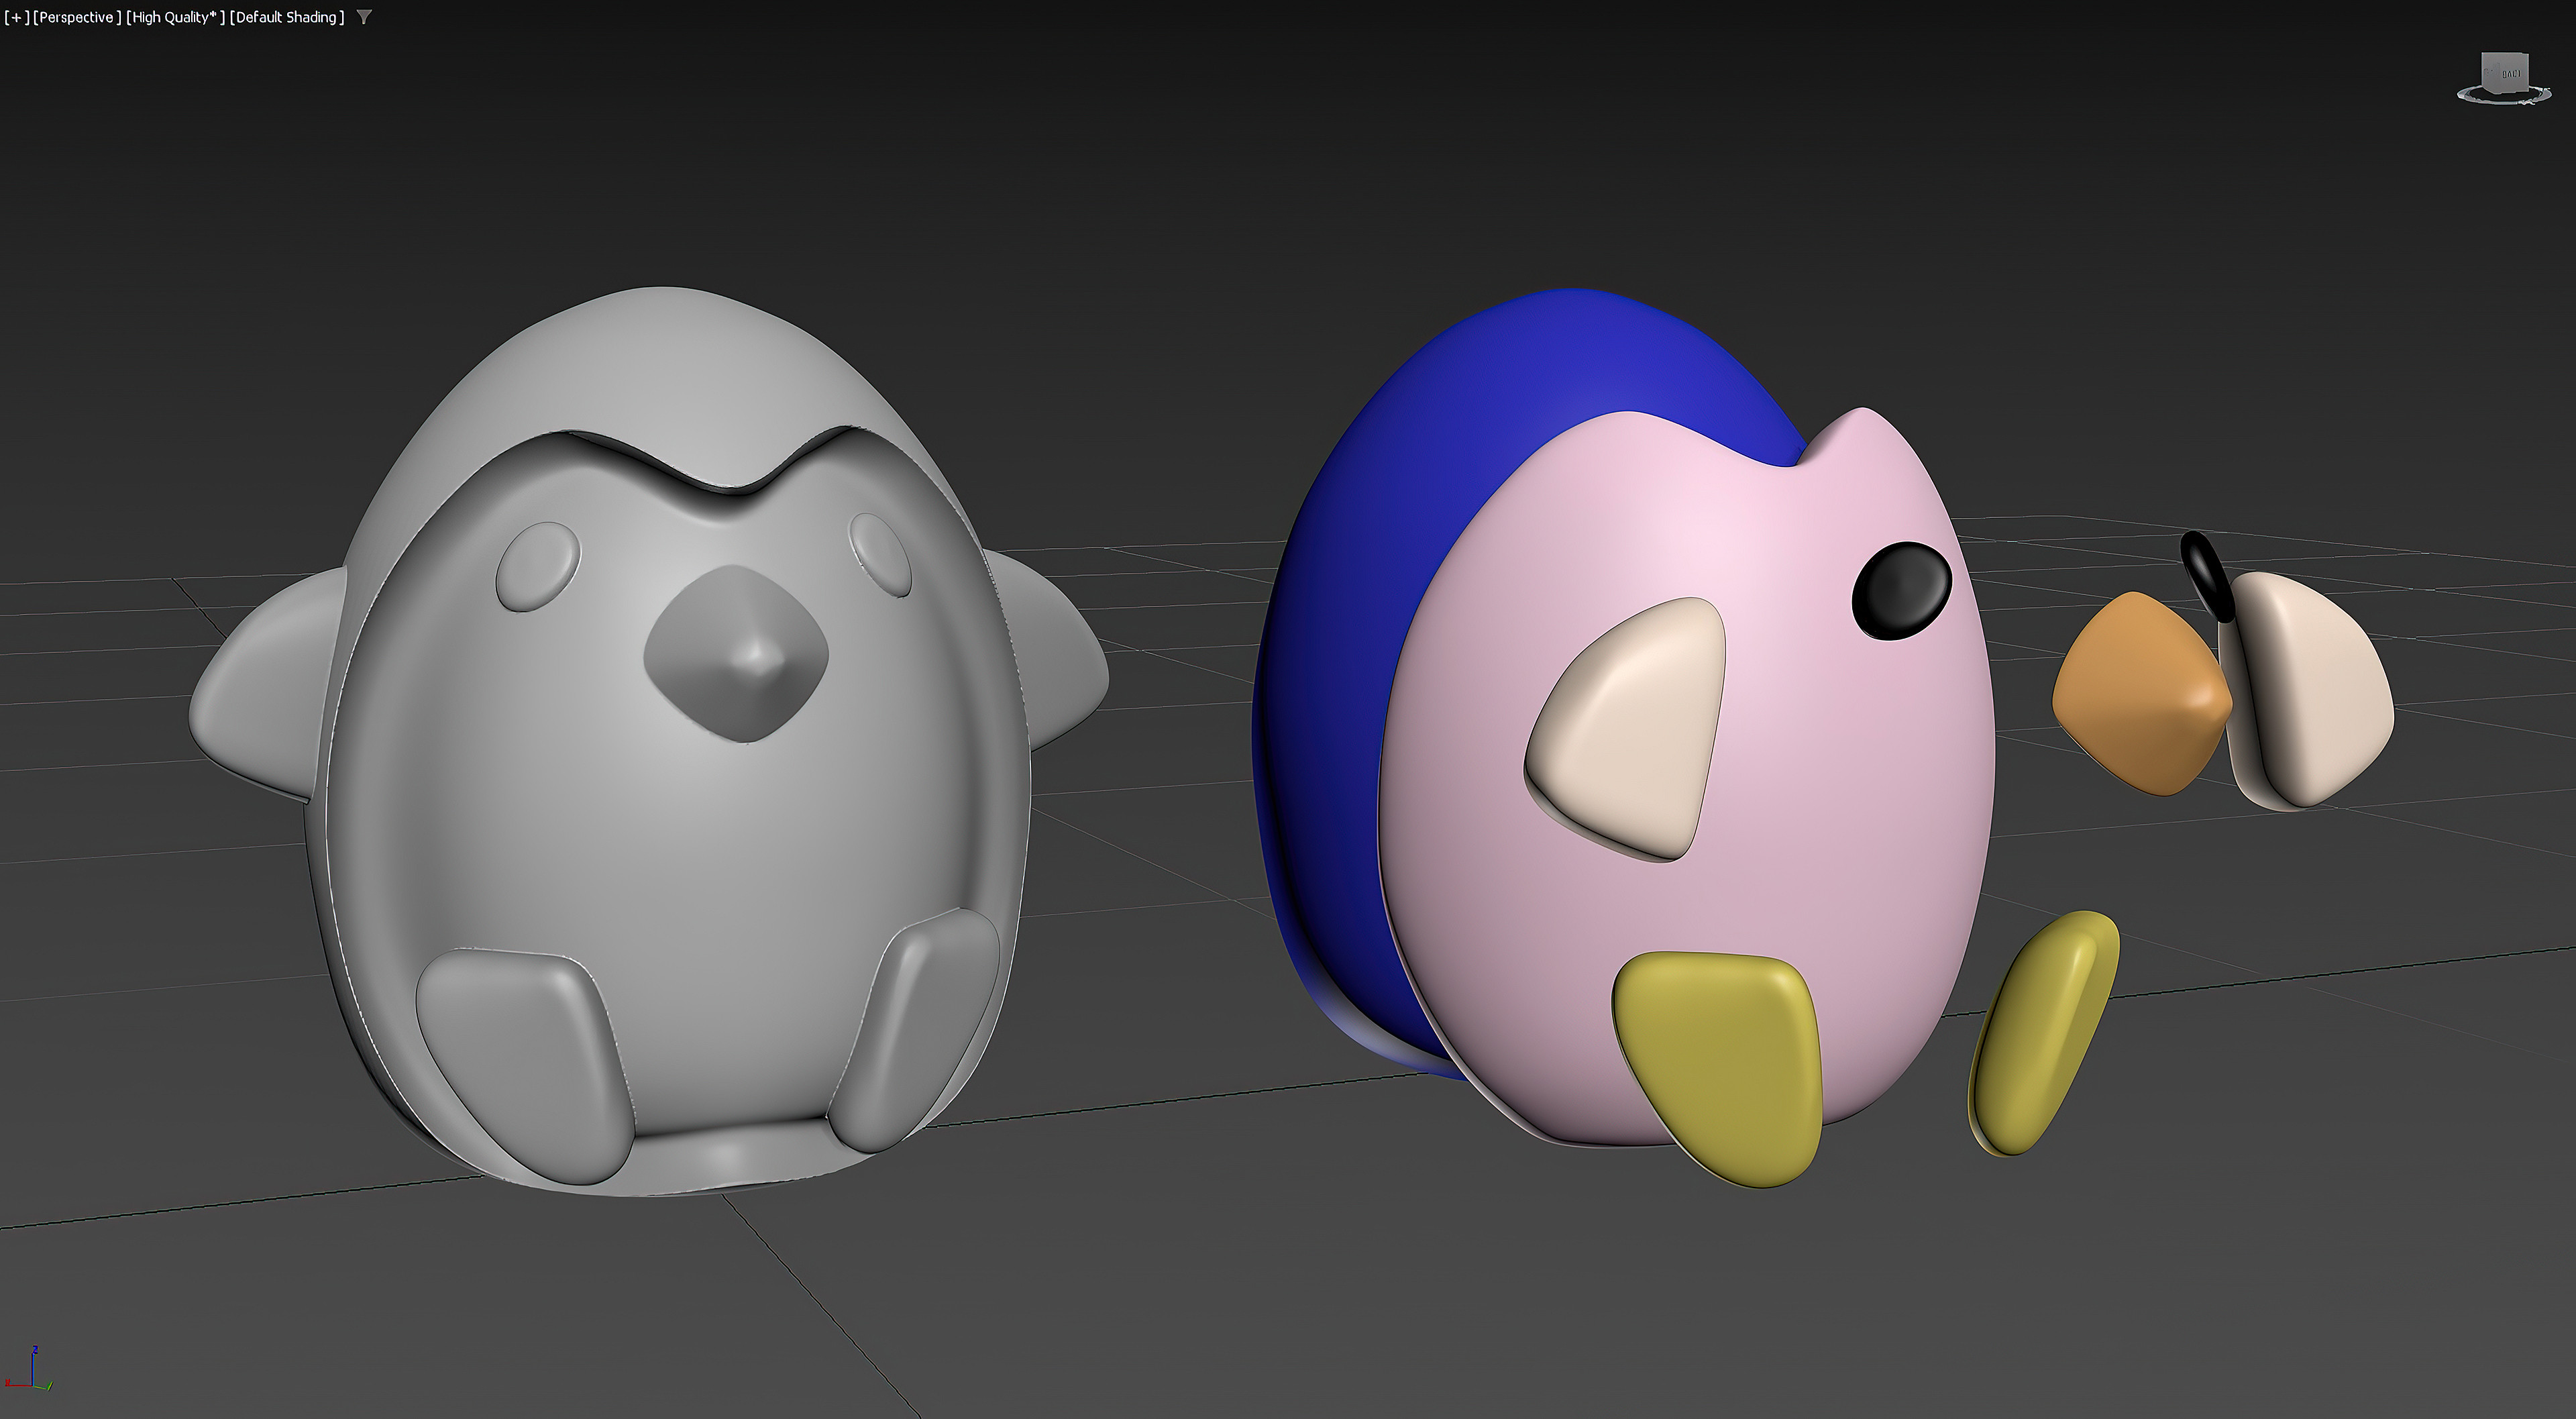 High Poly : VDB Result Left - Boolean Operands Right.